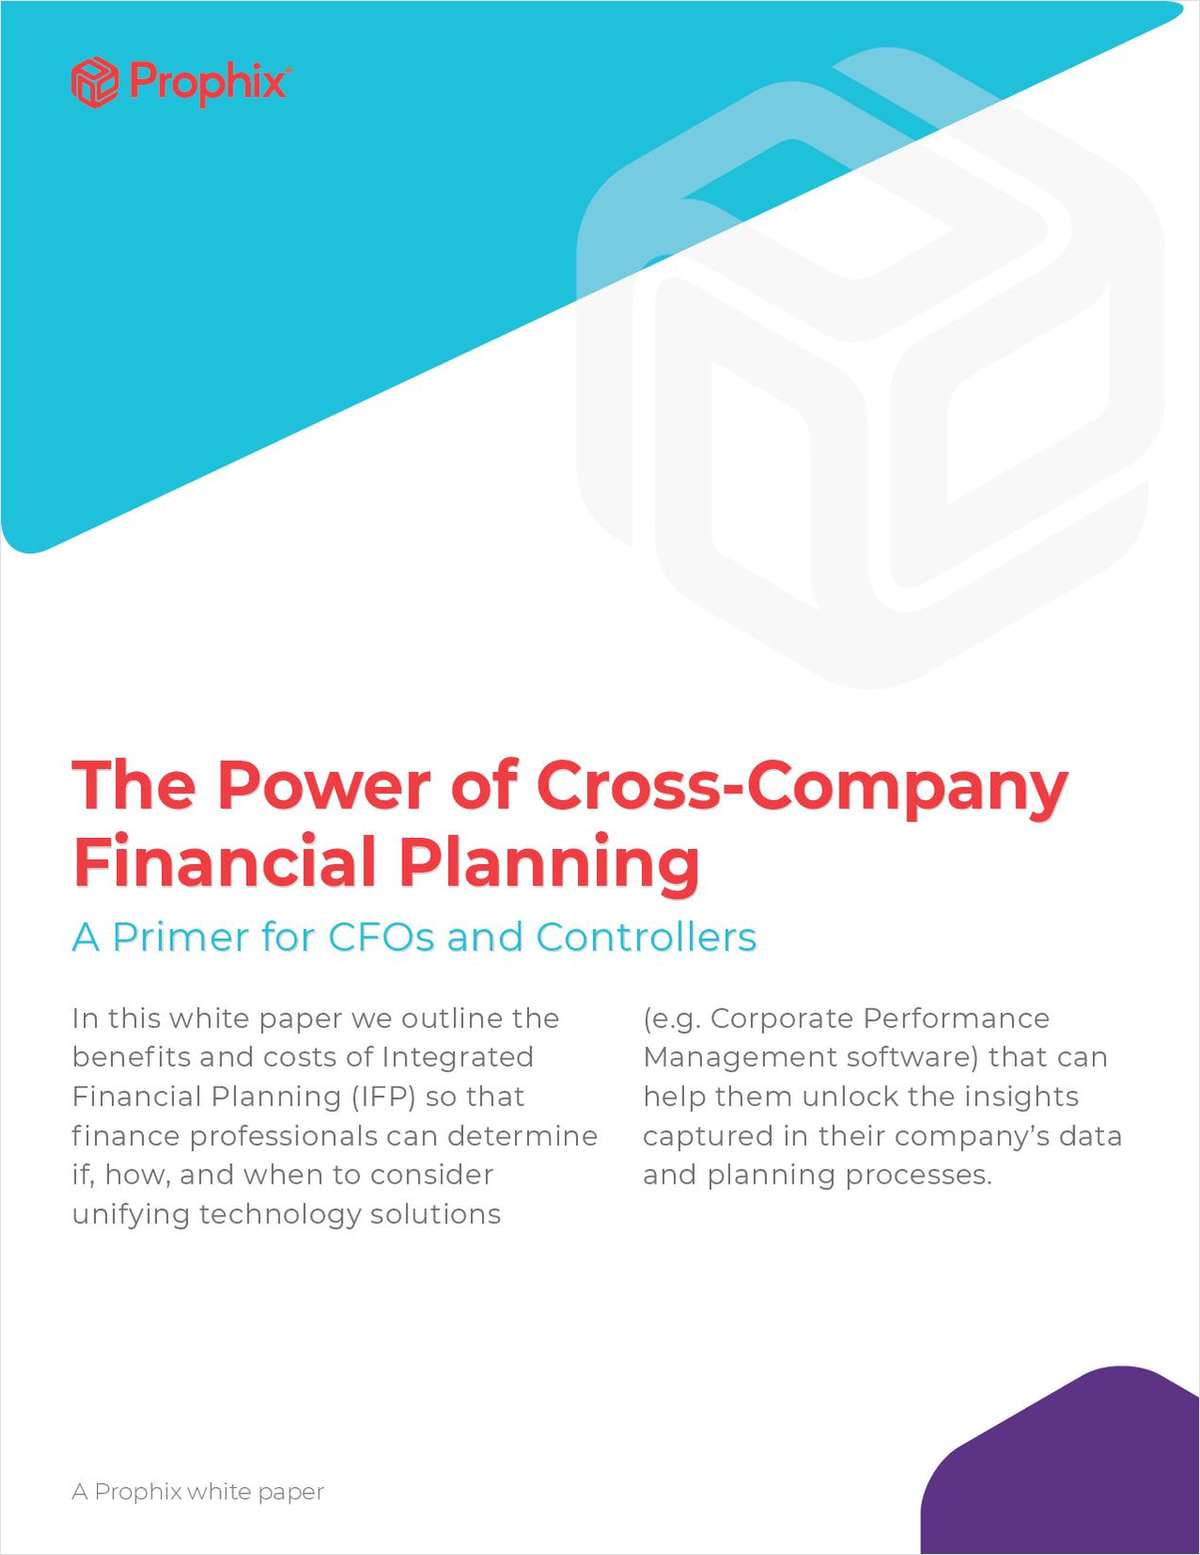 The Power of Cross-Company Financial Planning